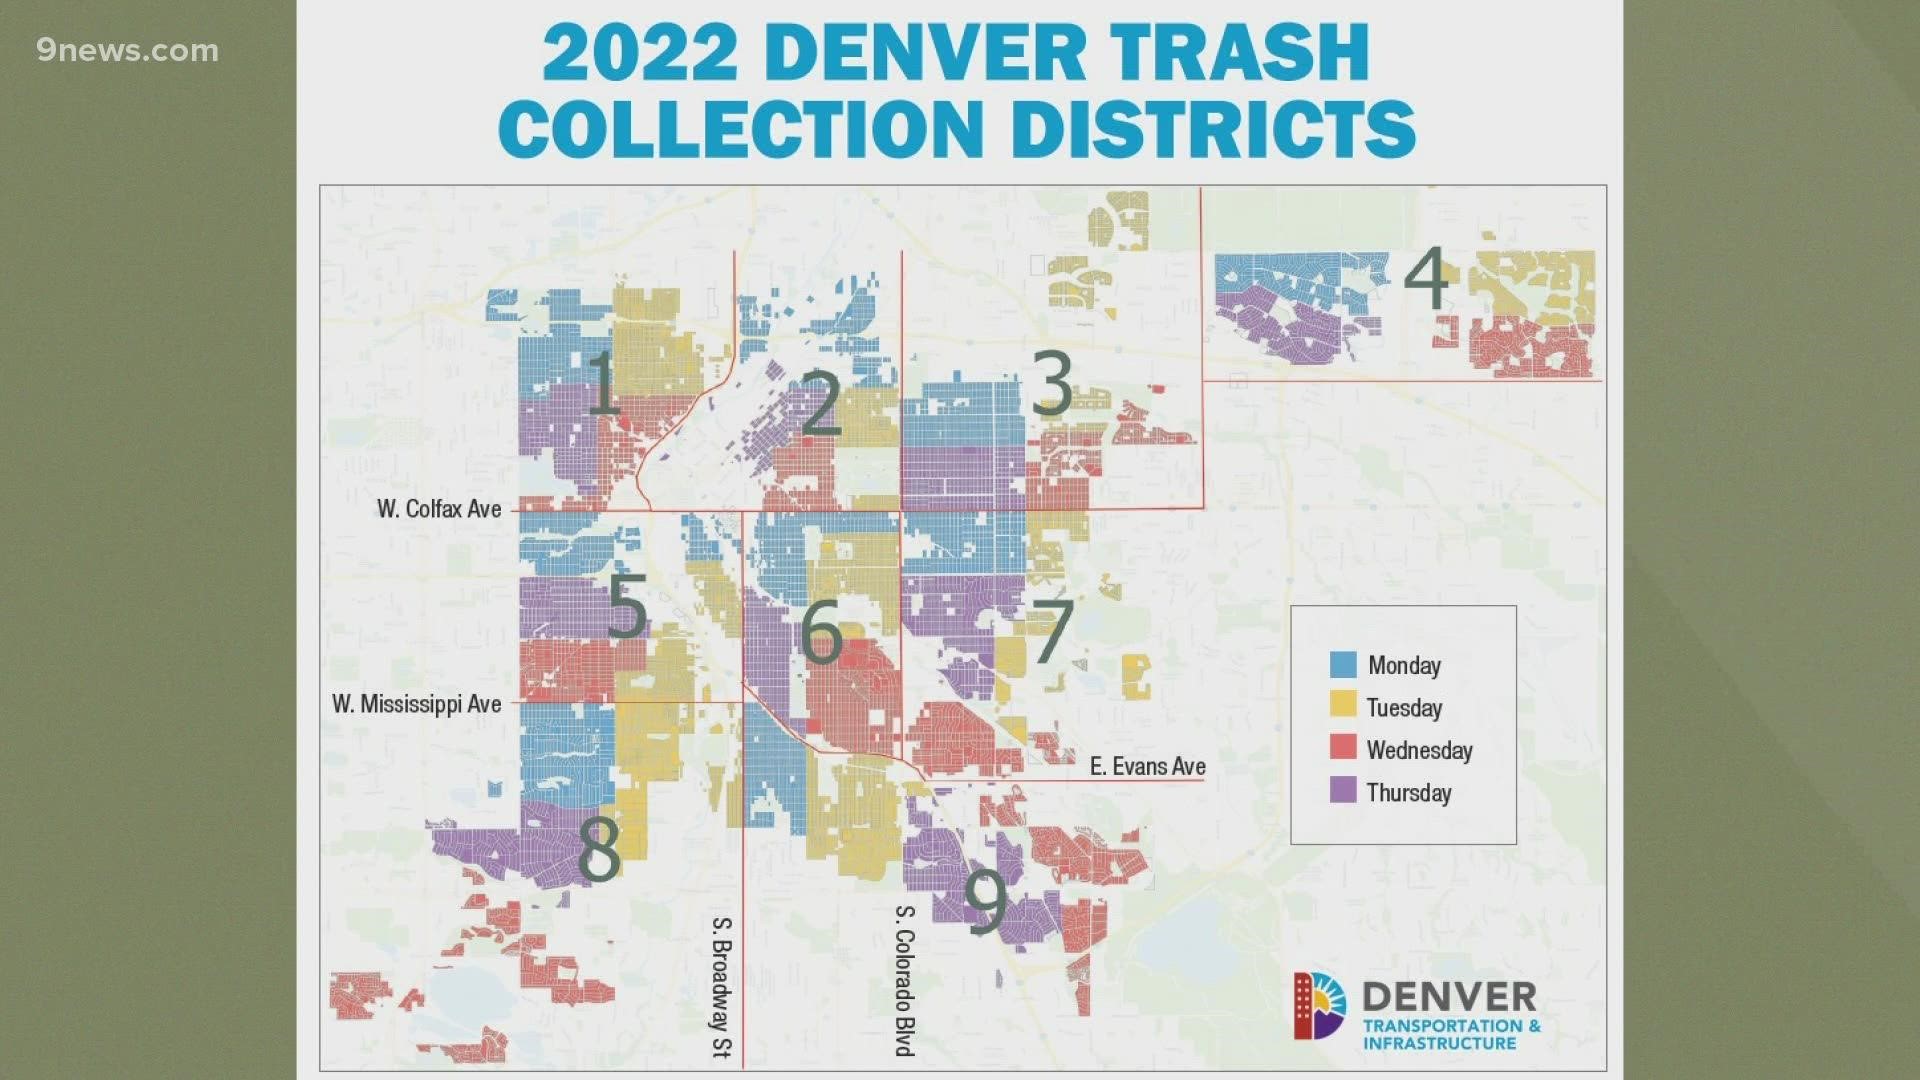 The city said this is the first time in more than 15 years it has made significant routing adjustments. Collection will move to a four-day schedule.